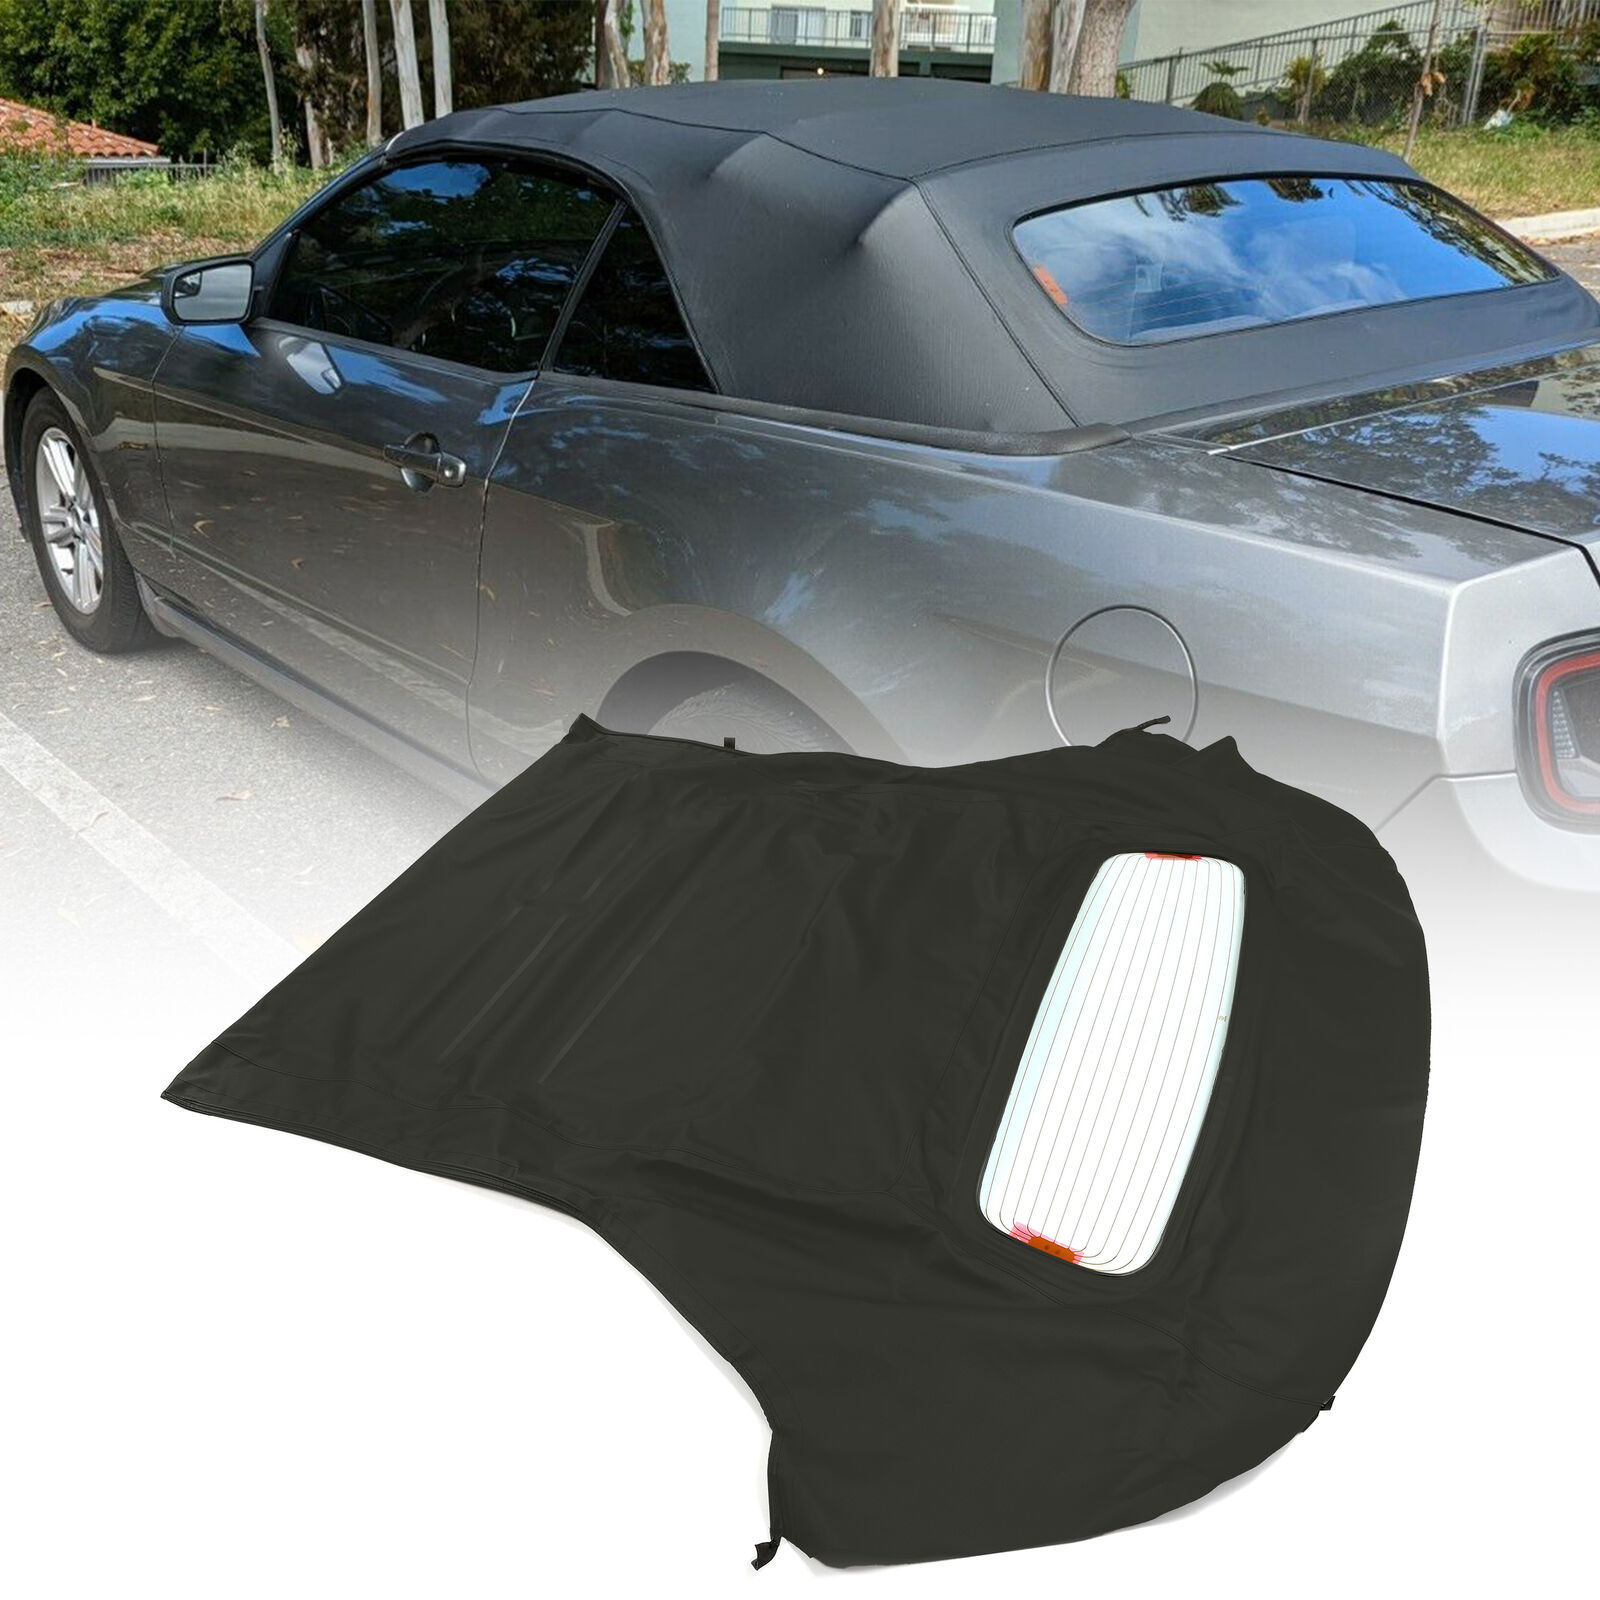 For 2005-2014 Ford Mustang Convertible Soft Top & Heated Glass Window Sailcloth